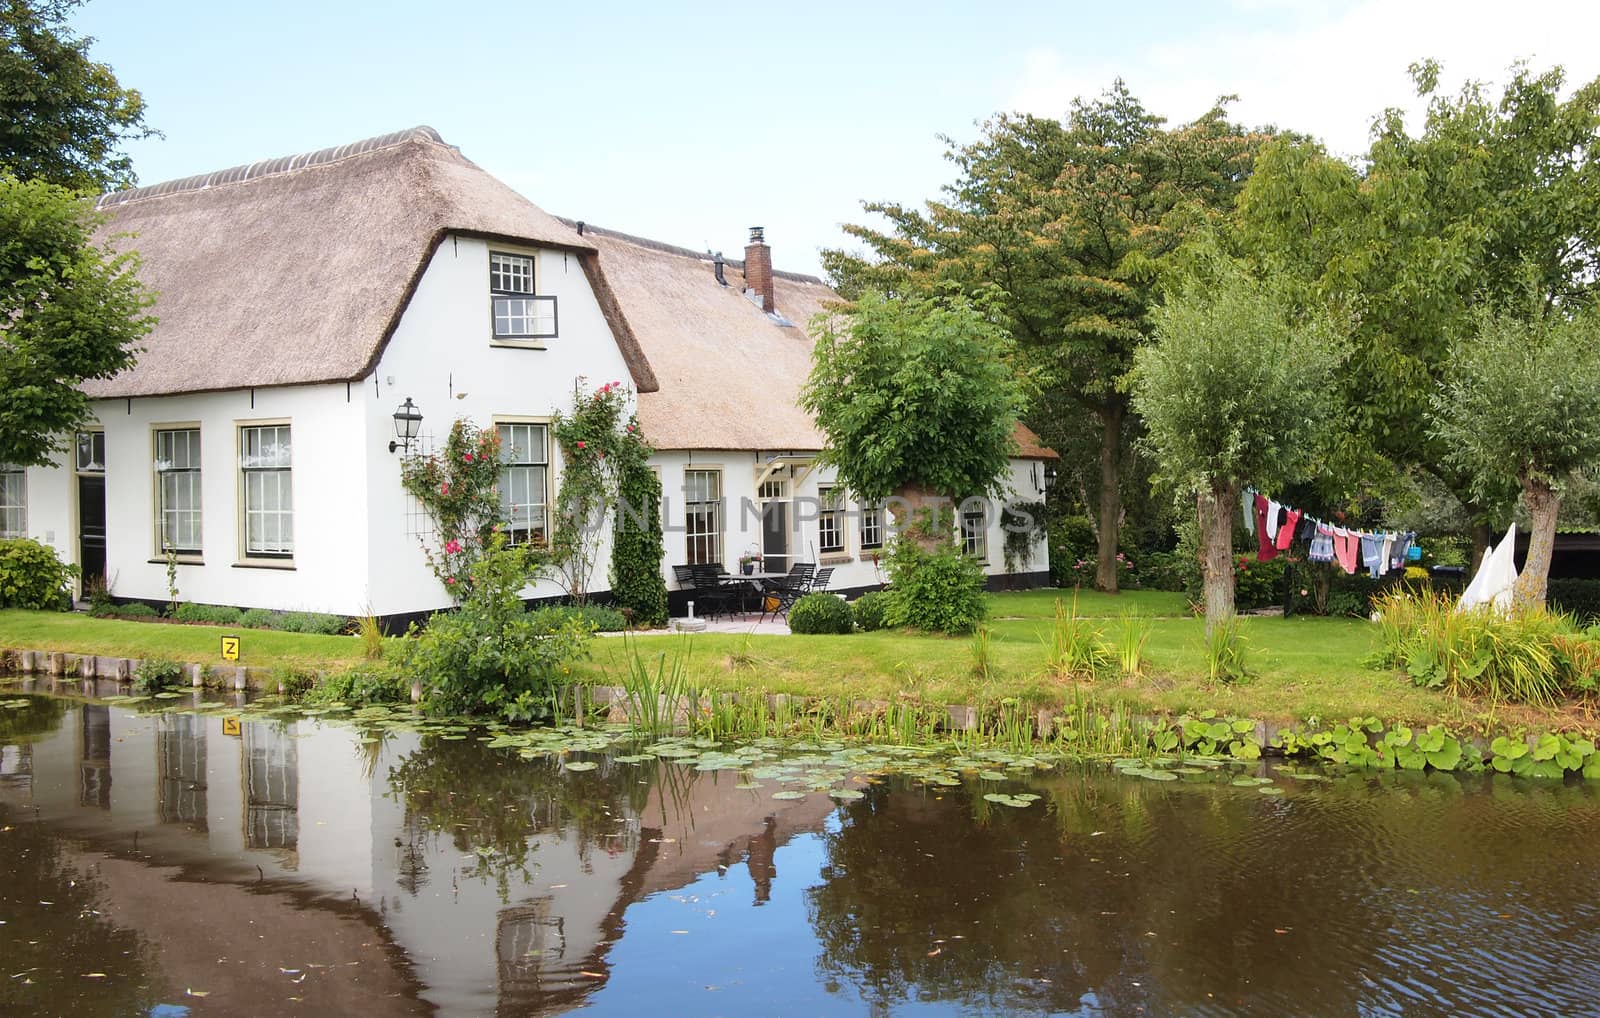 Luxury house with a thatched roof and a garden with drying laundry and reflection in the water.